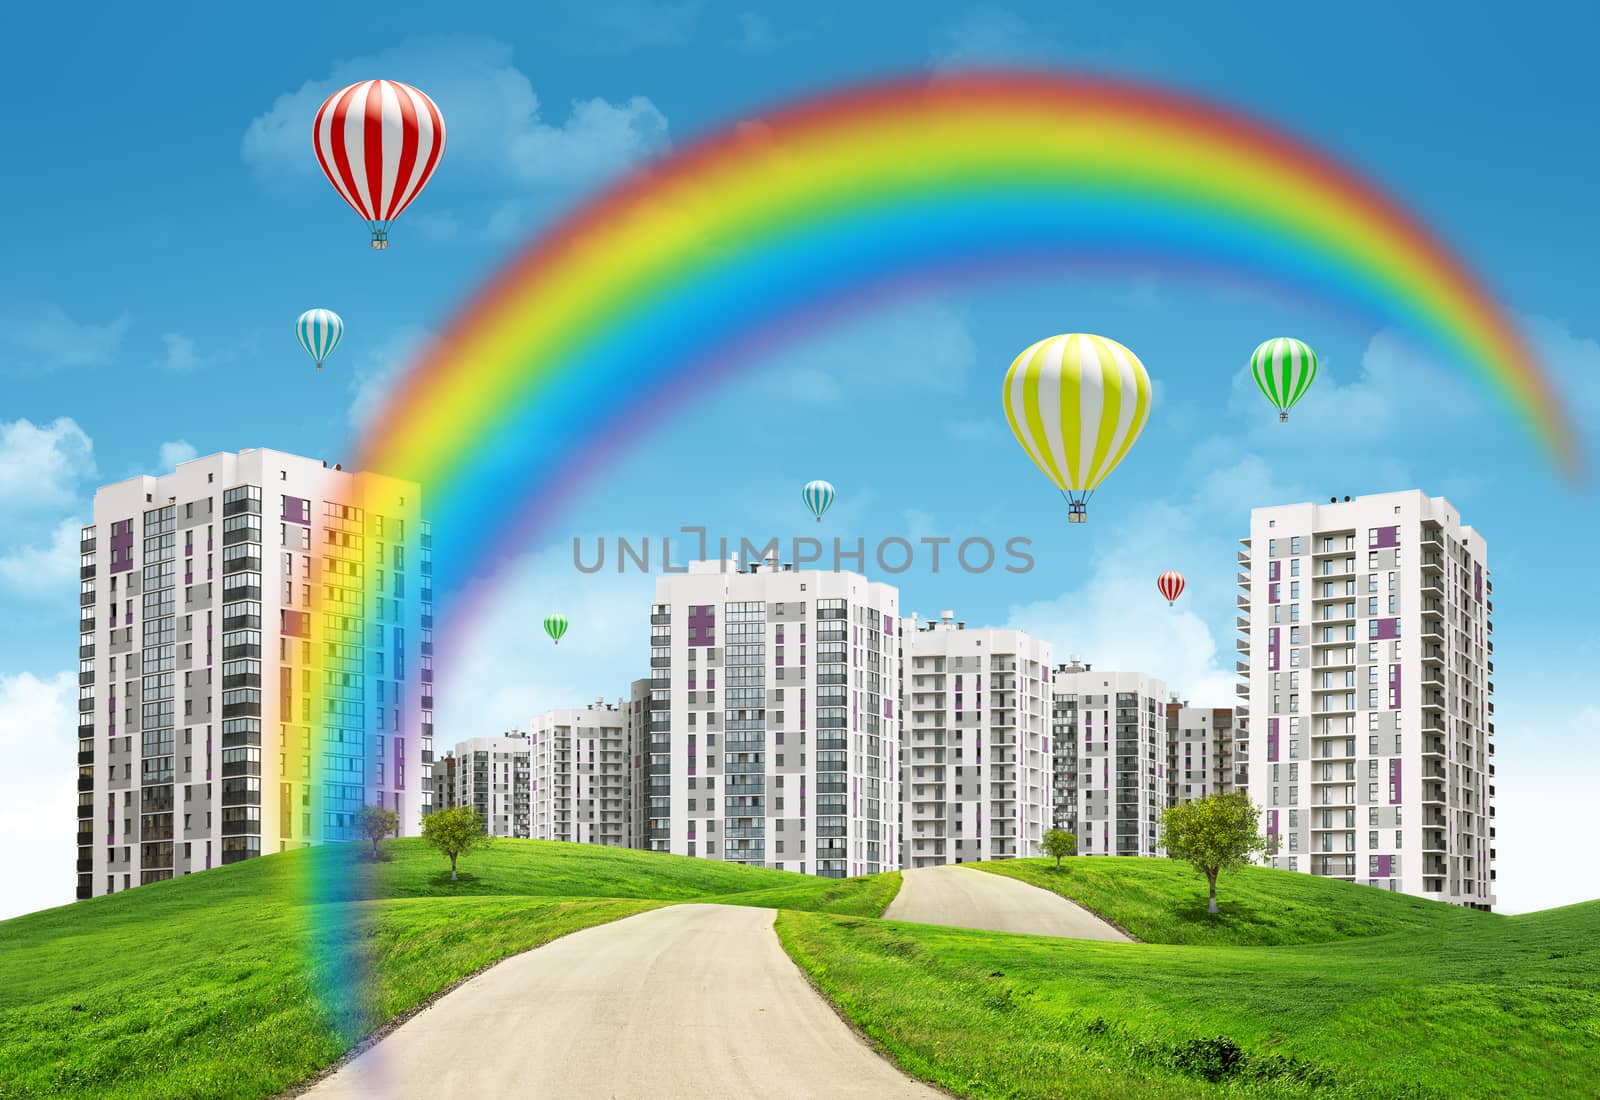 City on field with road and rainbow, nature concept